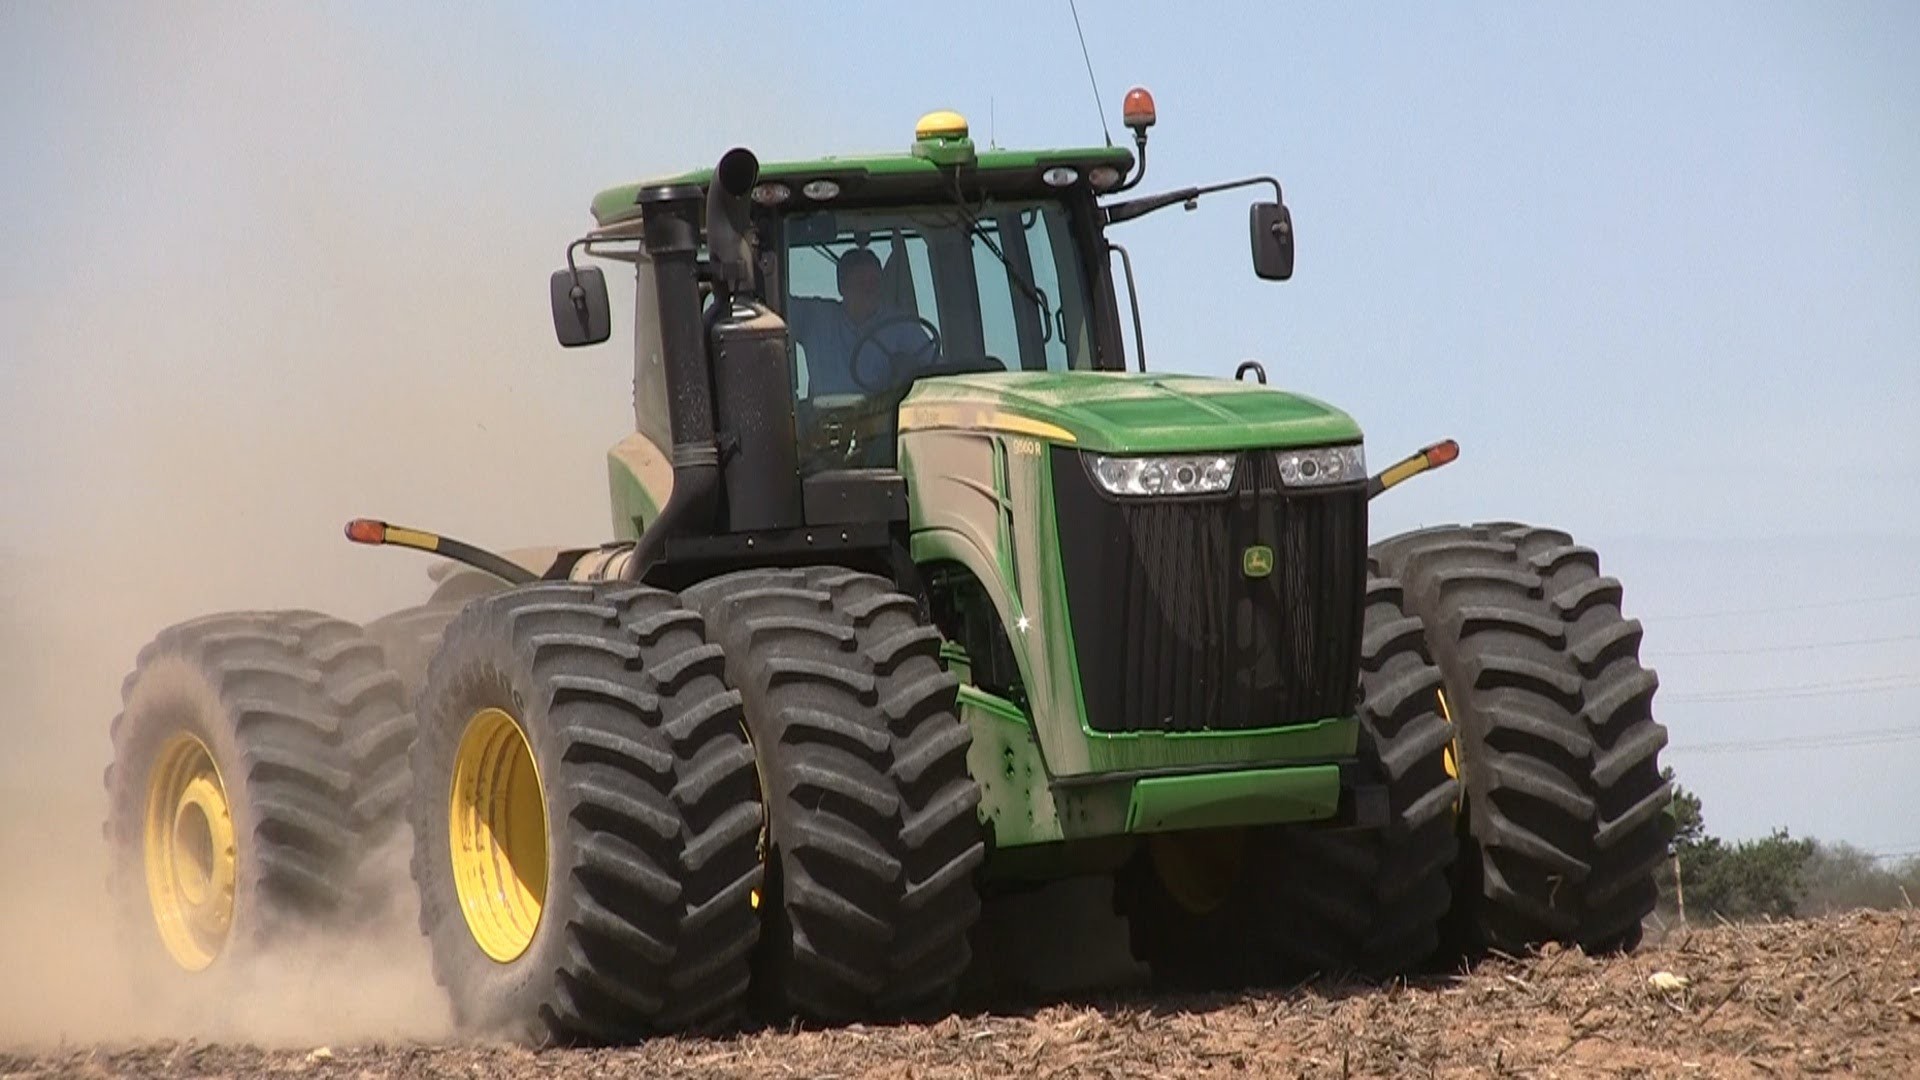 1920x1080 Pitstick Farms - John Deere 9560R and 9530 Tractors on 5-7-2013 - YouTube